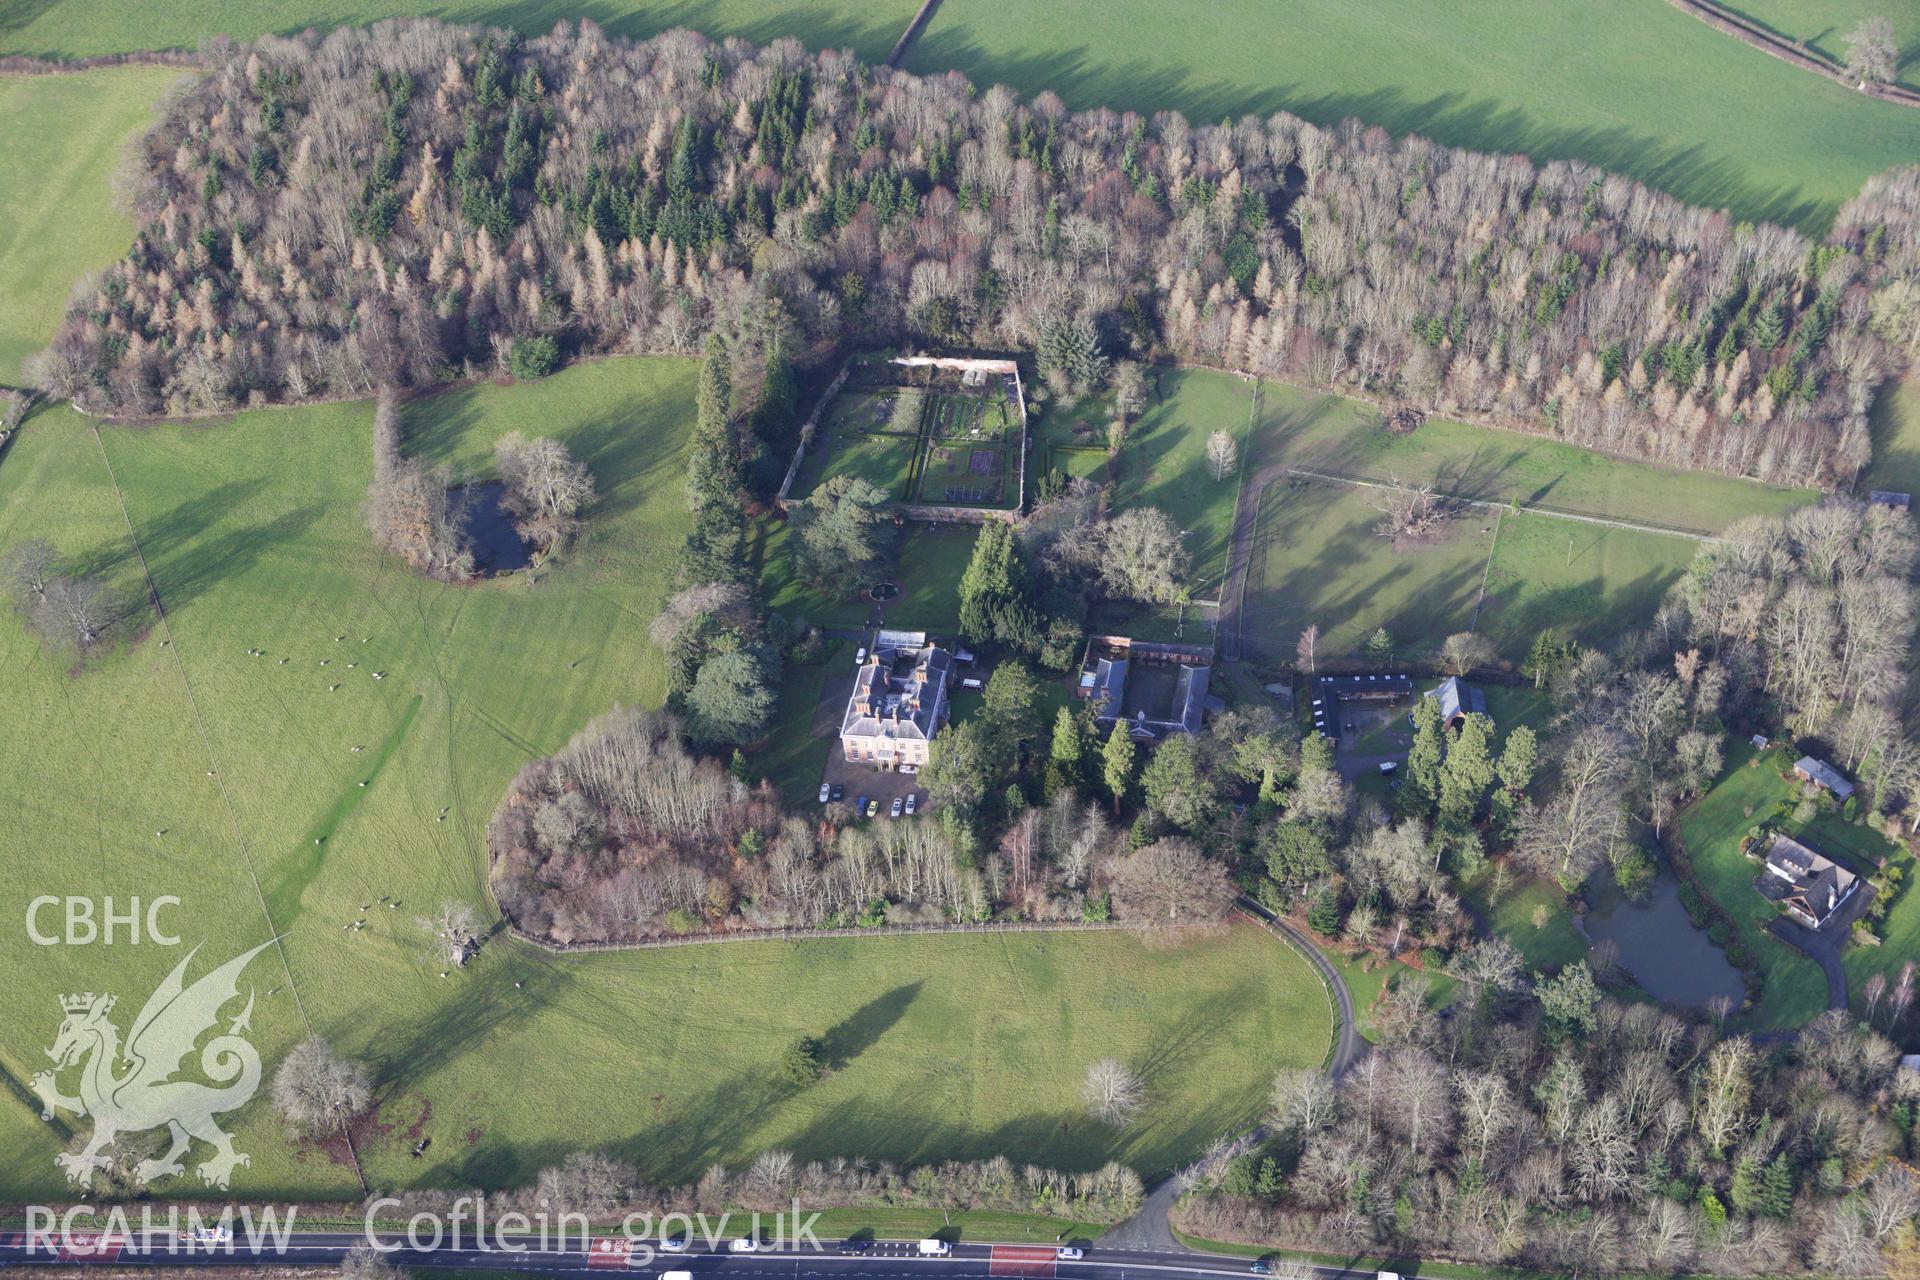 RCAHMW colour oblique aerial photograph of Garthmyl Hall. Taken on 10 December 2009 by Toby Driver